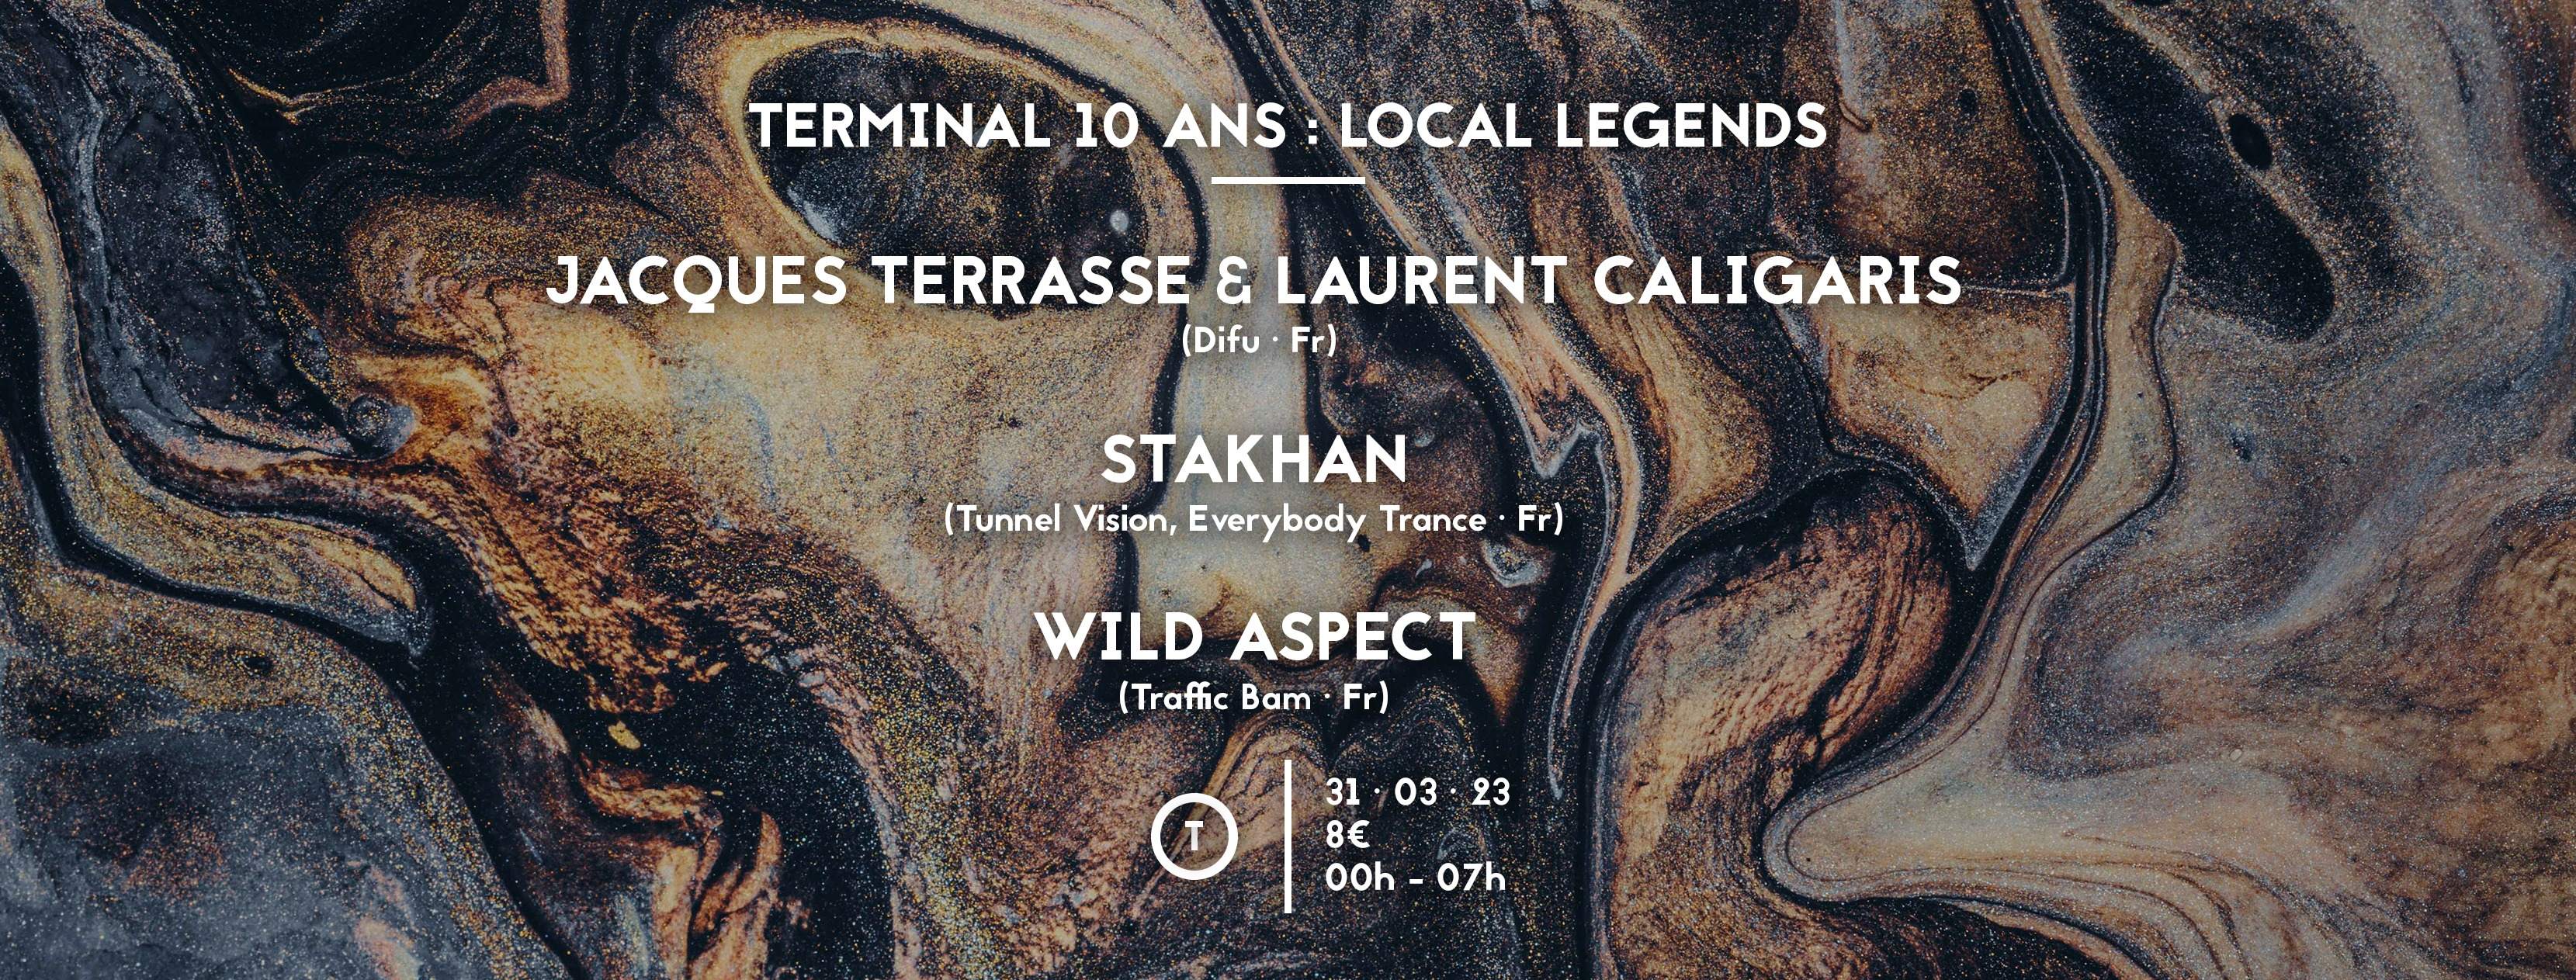 Terminal '10 ans - Local Legends': Jacques Terrasse & Laurent Caligaris, Stakhan, Wild Aspect - Página frontal